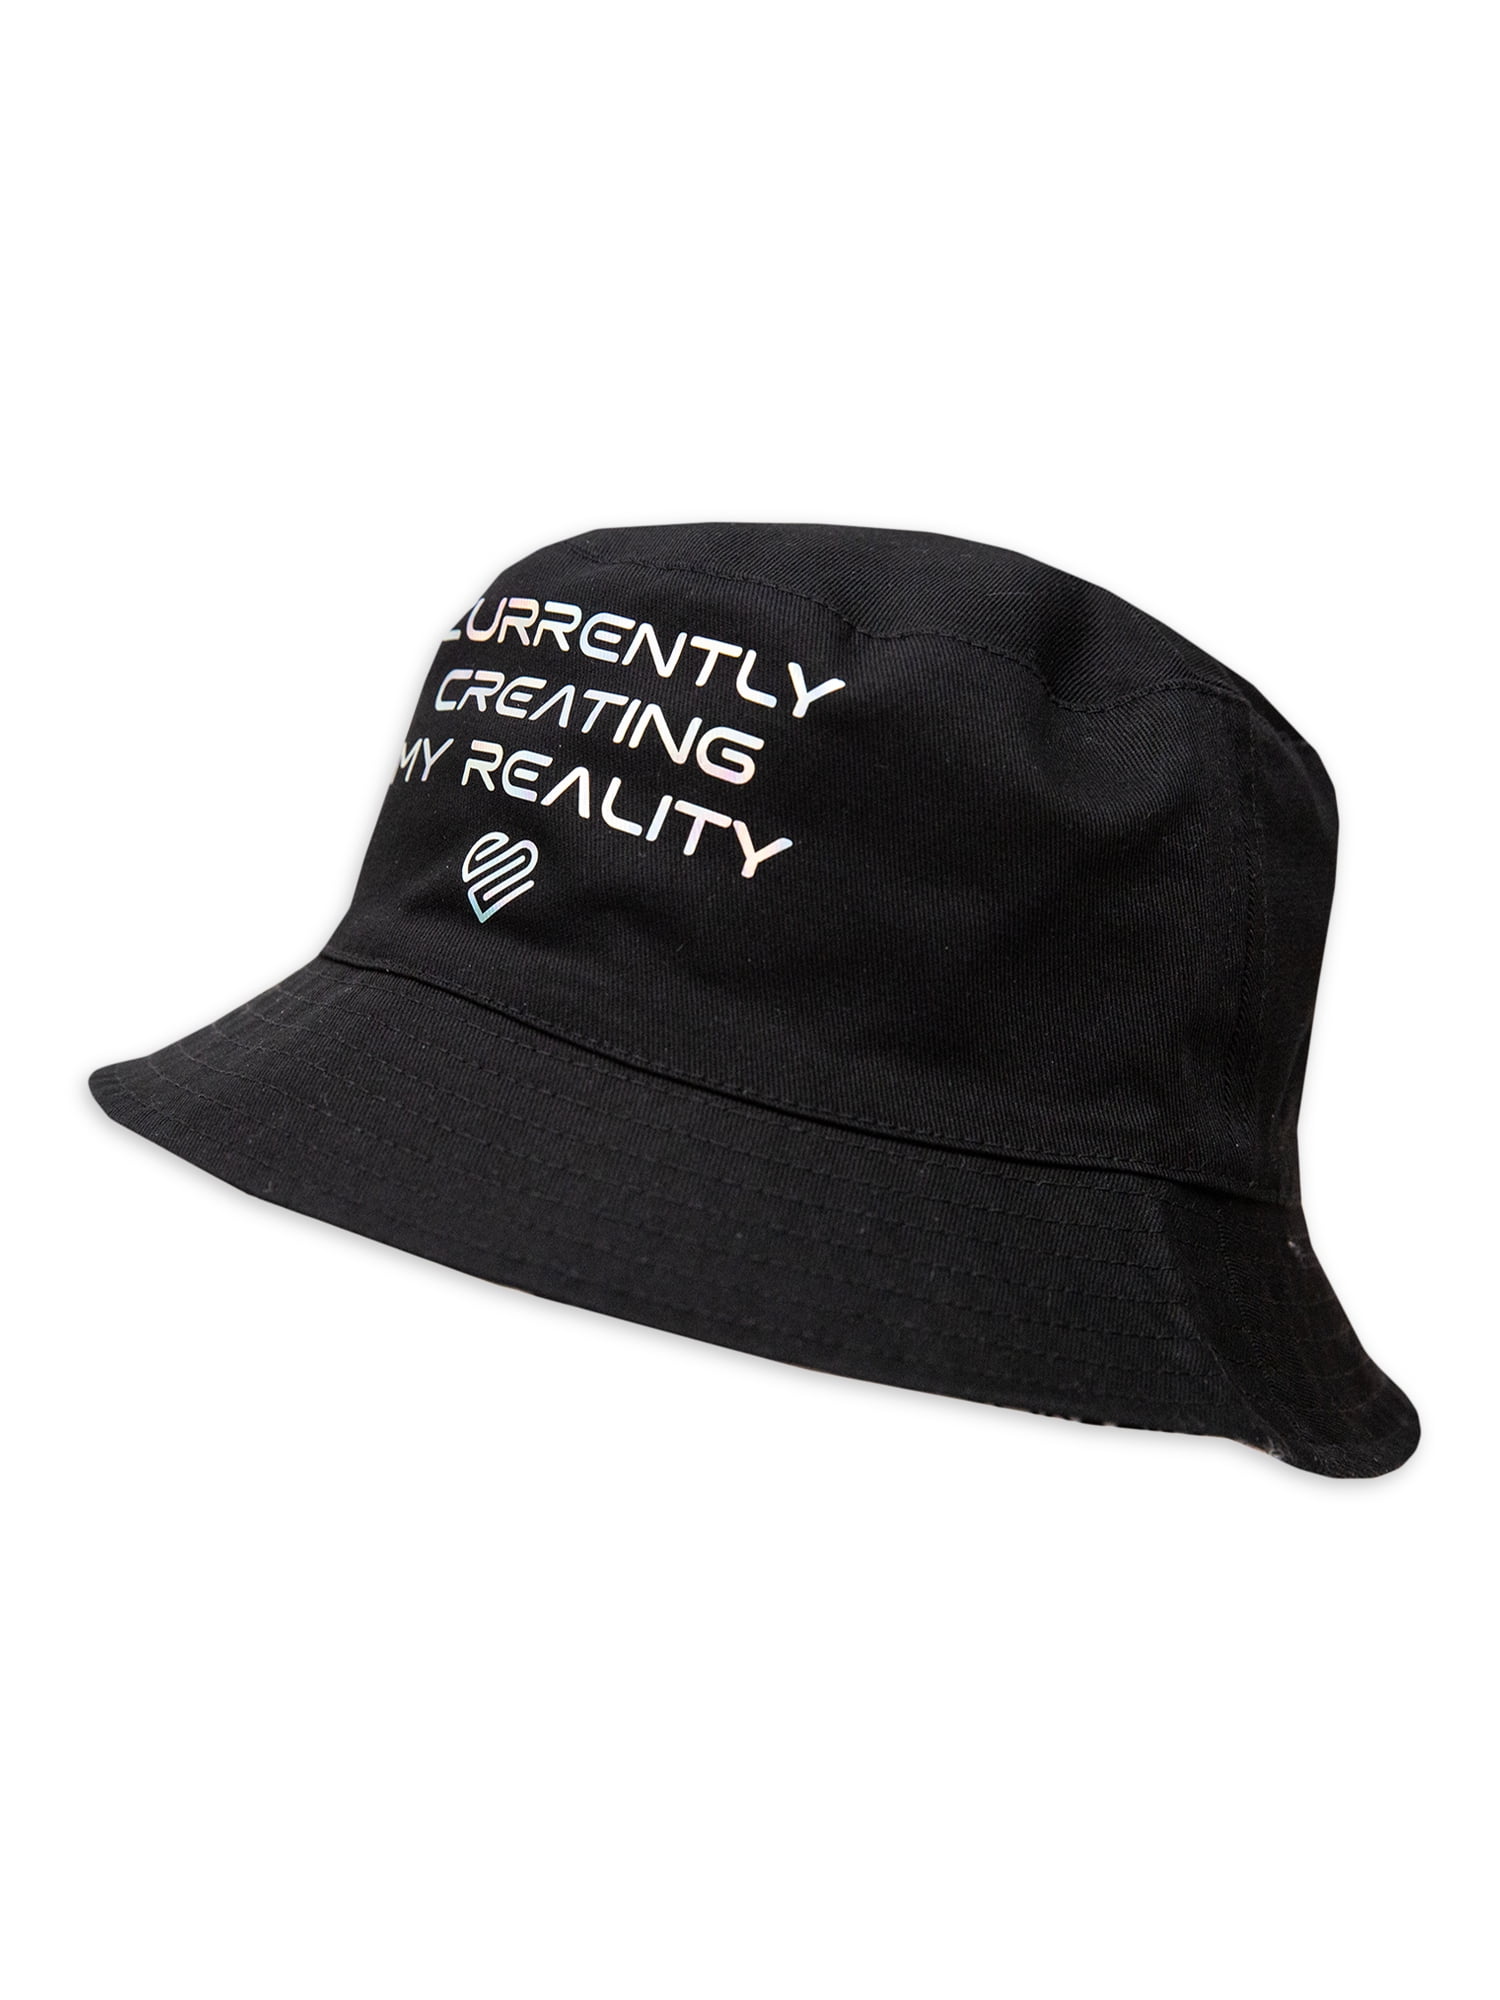 Justice Brand Girls Reversible Black and White Bucket Style Hat, Creating My Reality